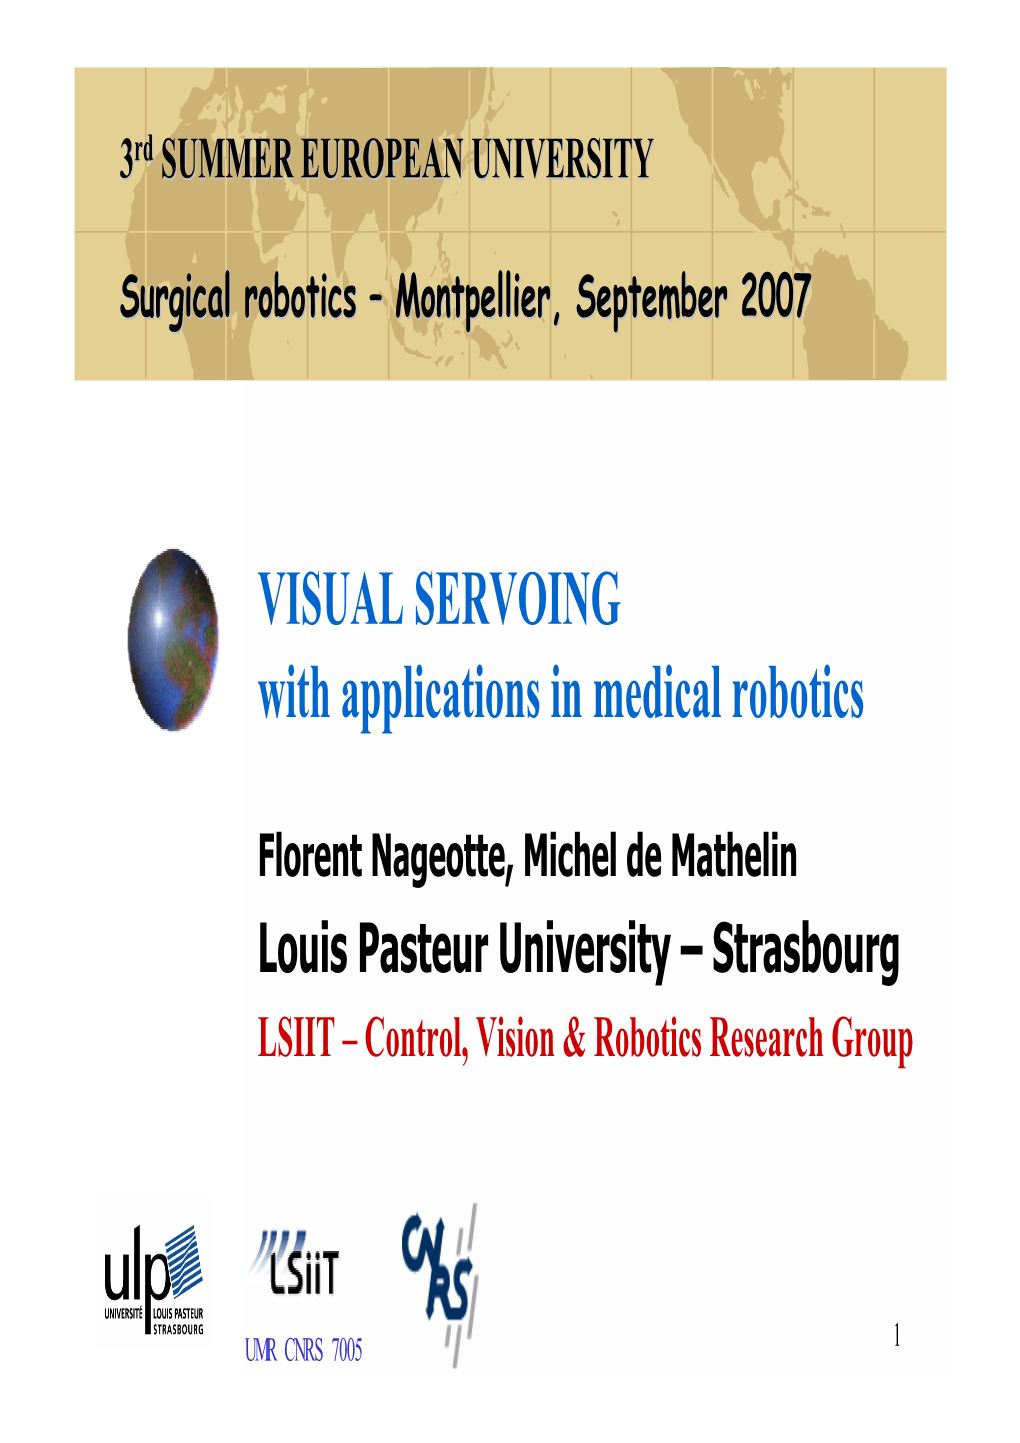 VISUAL SERVOING with Applications in Medical Robotics